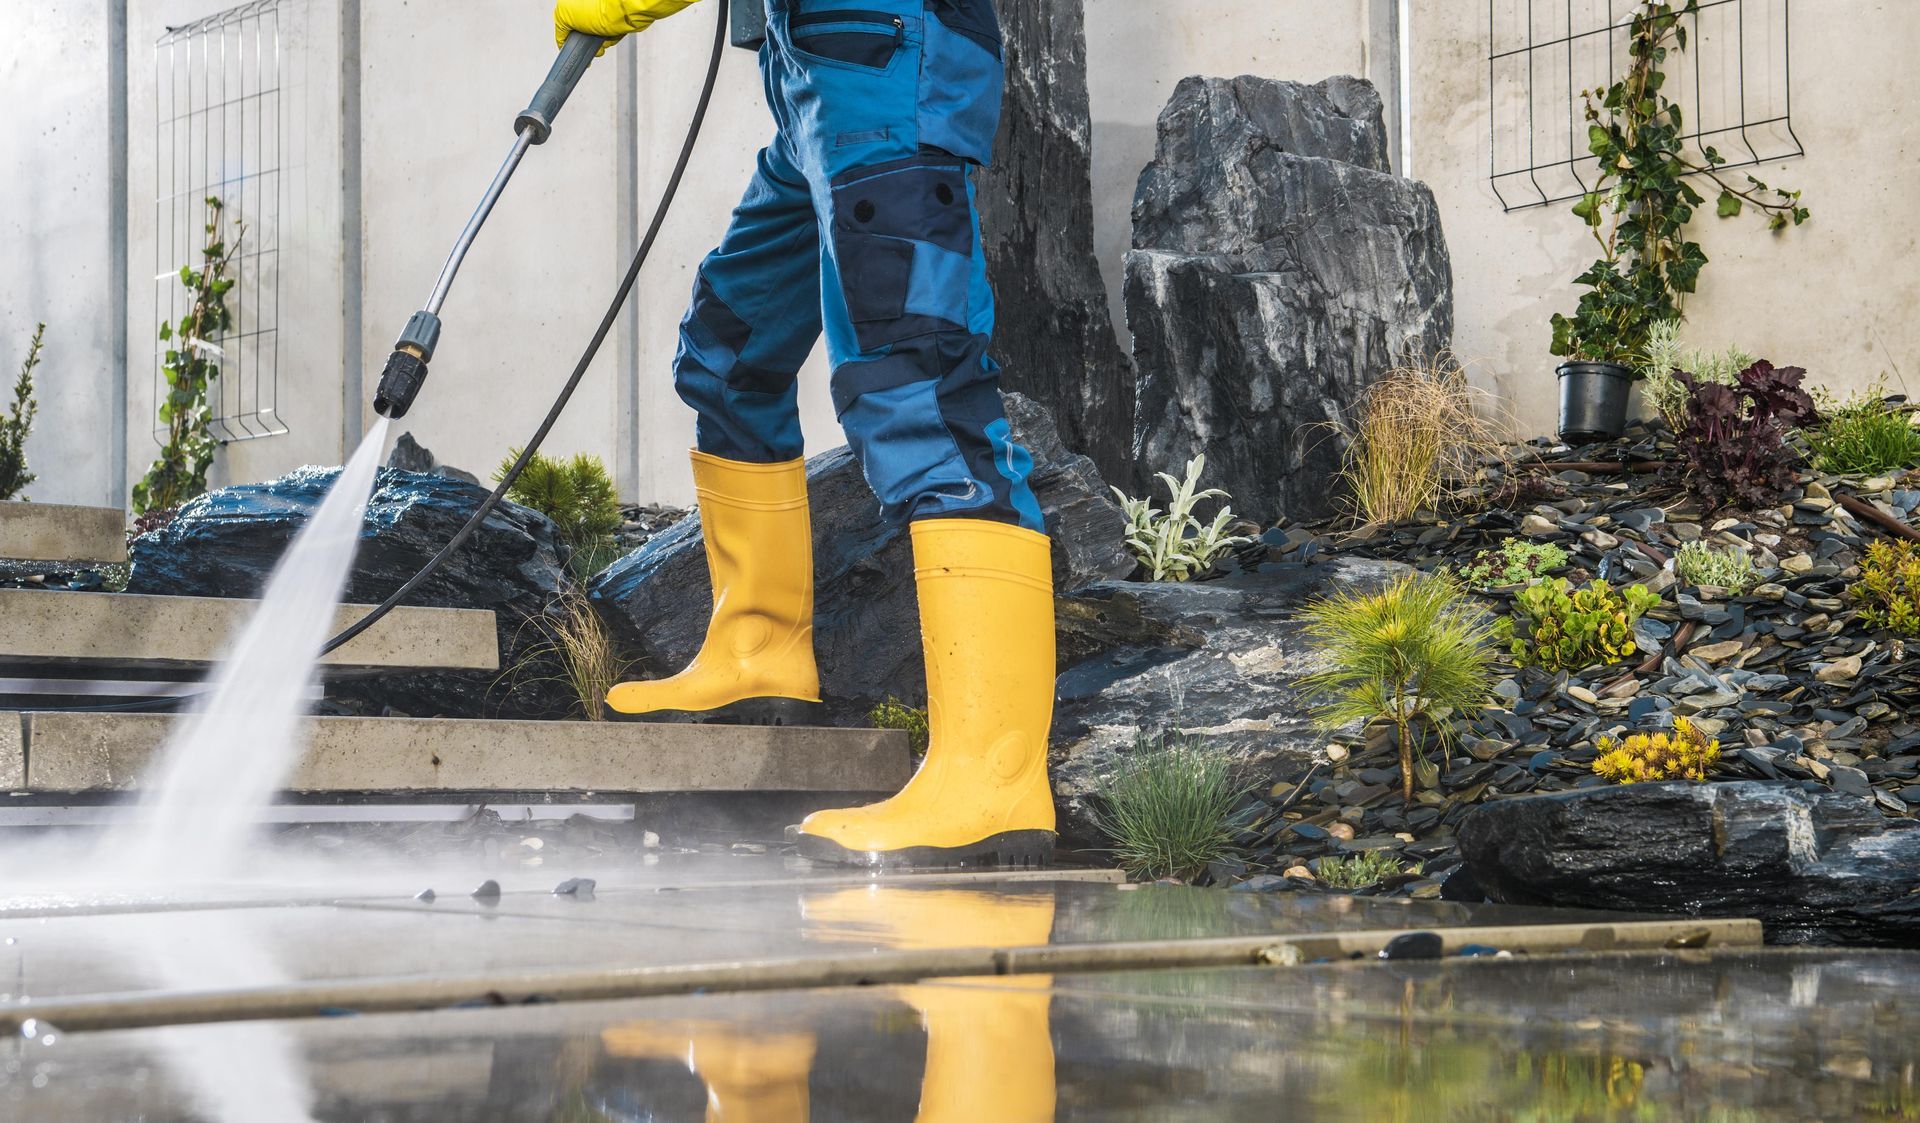 A man in yellow boots is using a high pressure washer to clean a sidewalk.